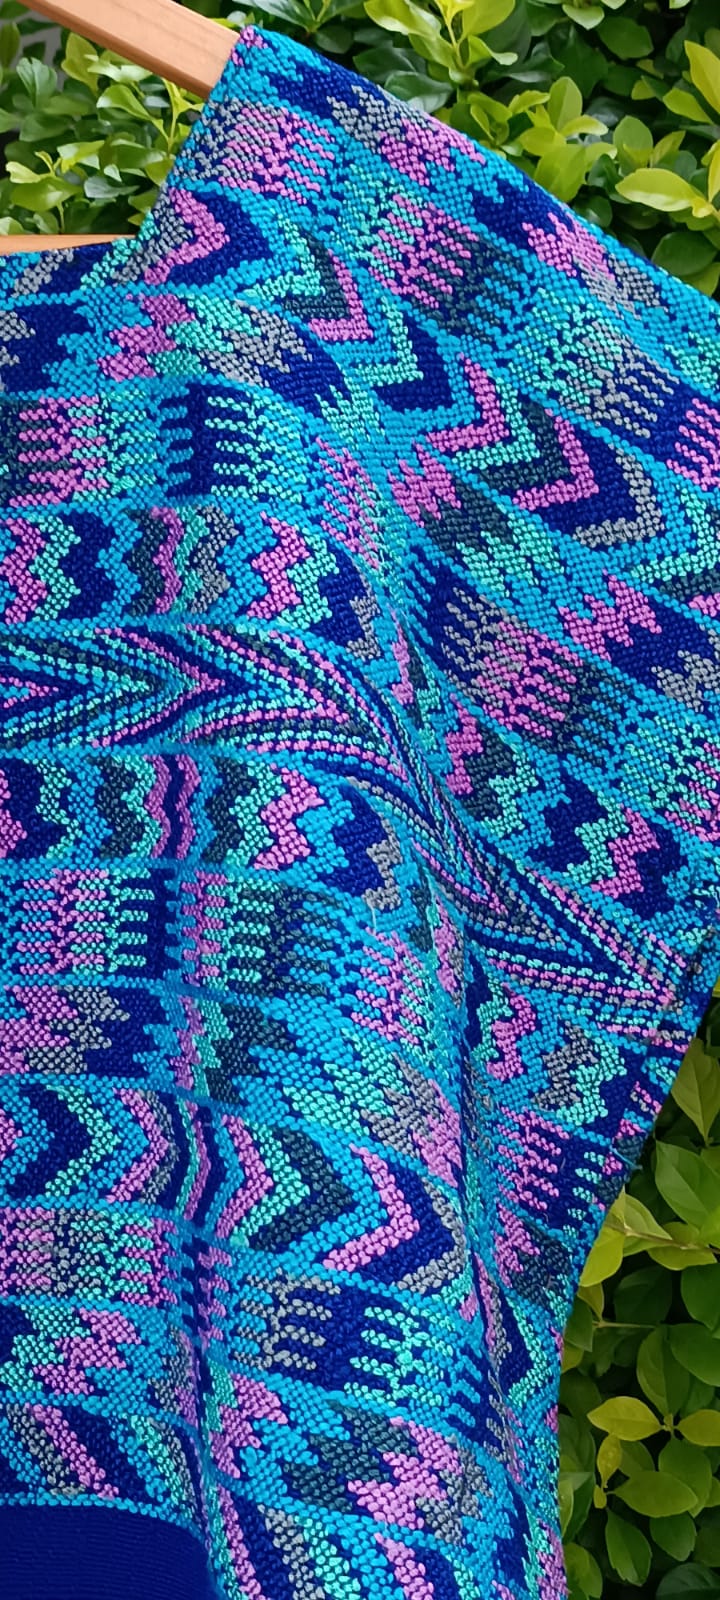 Bright blue and pink Comalapa huipil